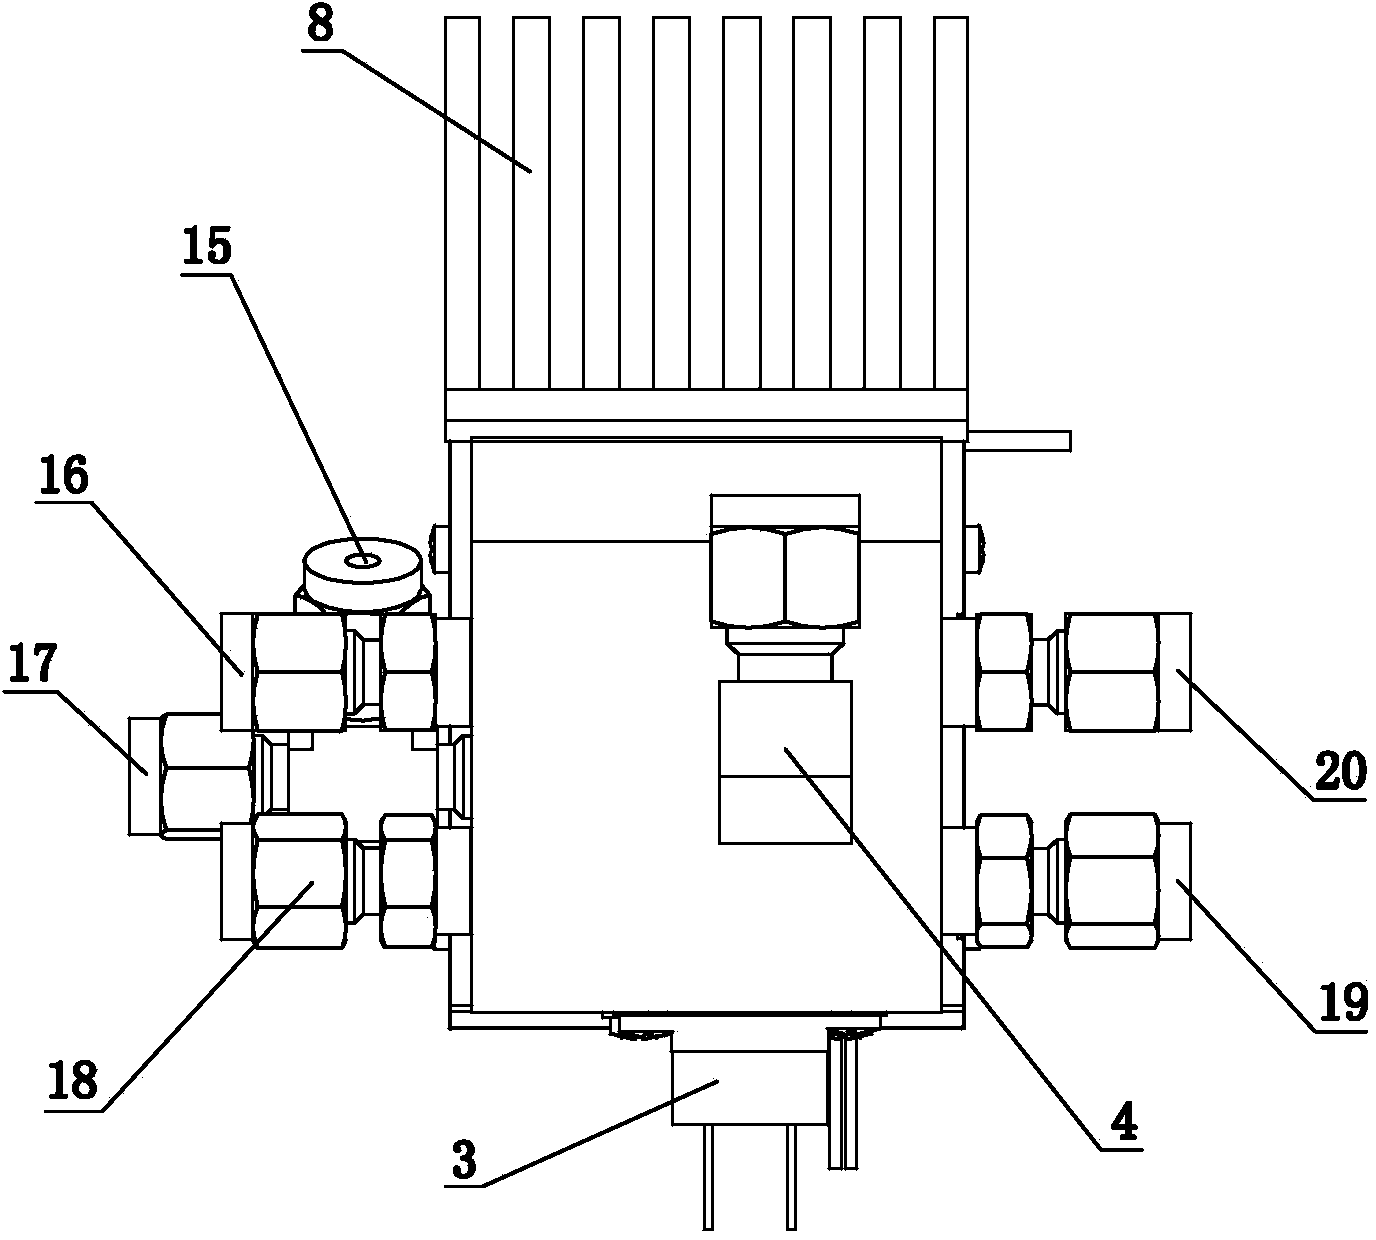 Nitrogen oxide detector and small automatic nitrogen oxide monitoring device using detector